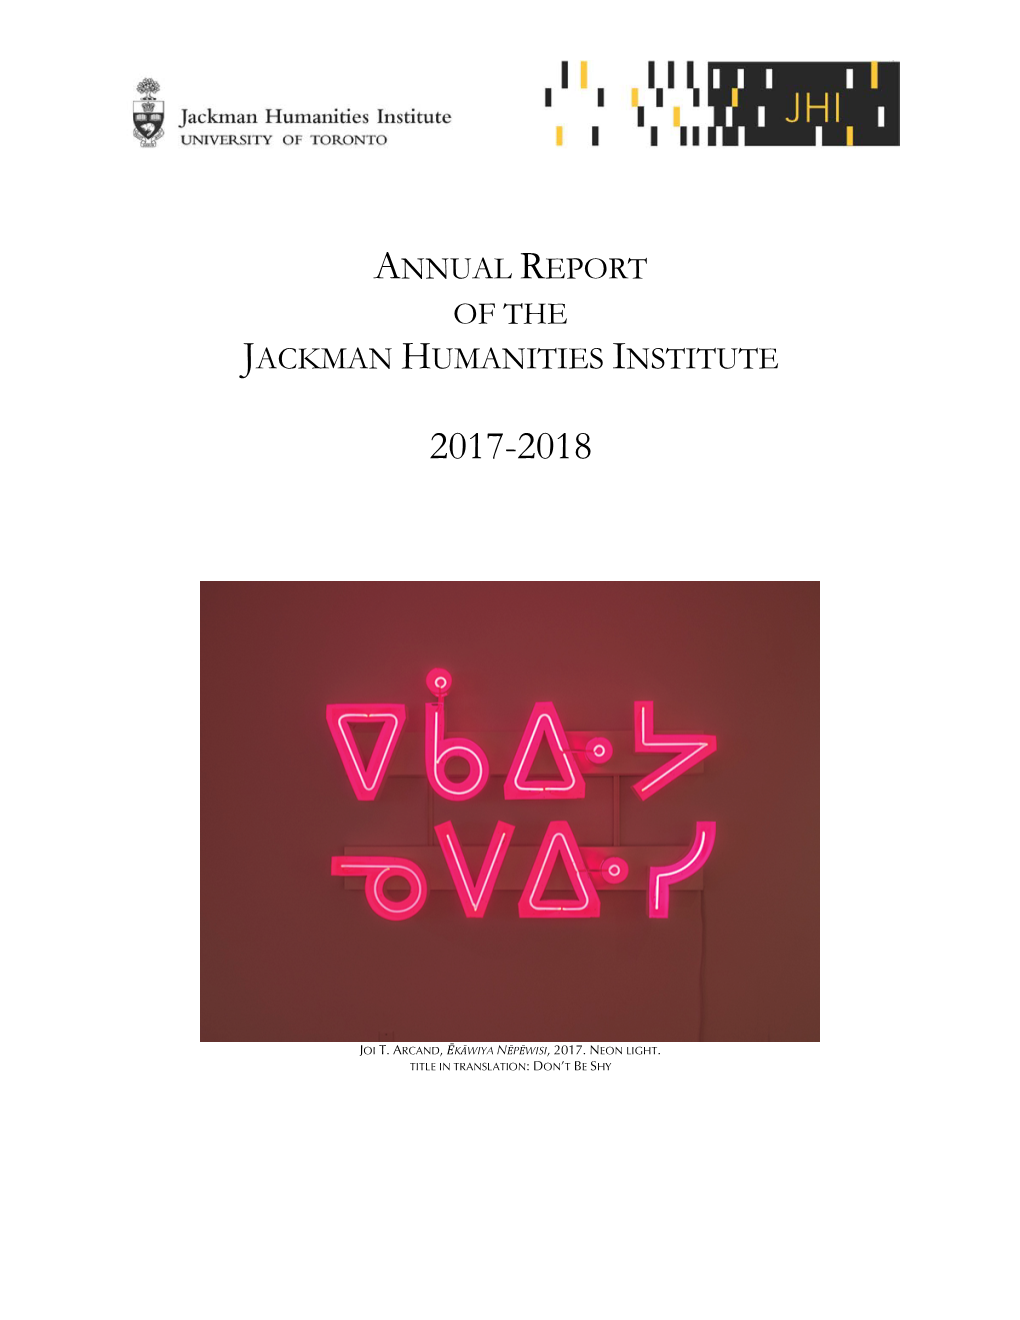 Annual Report of the Jackman Humanities Institute